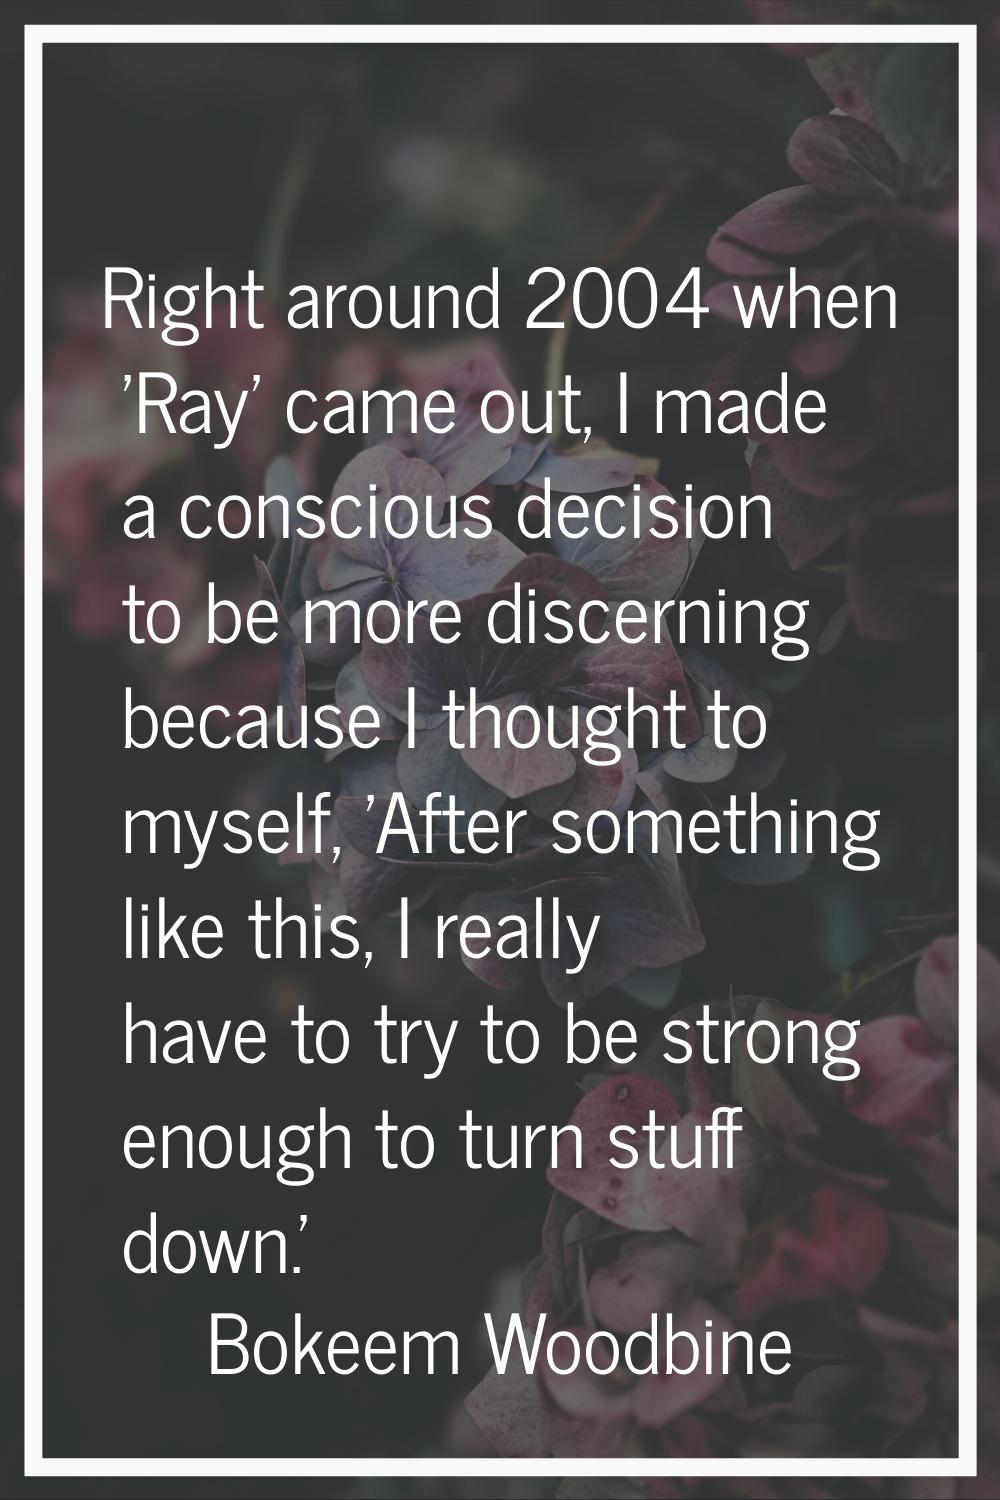 Right around 2004 when 'Ray' came out, I made a conscious decision to be more discerning because I 